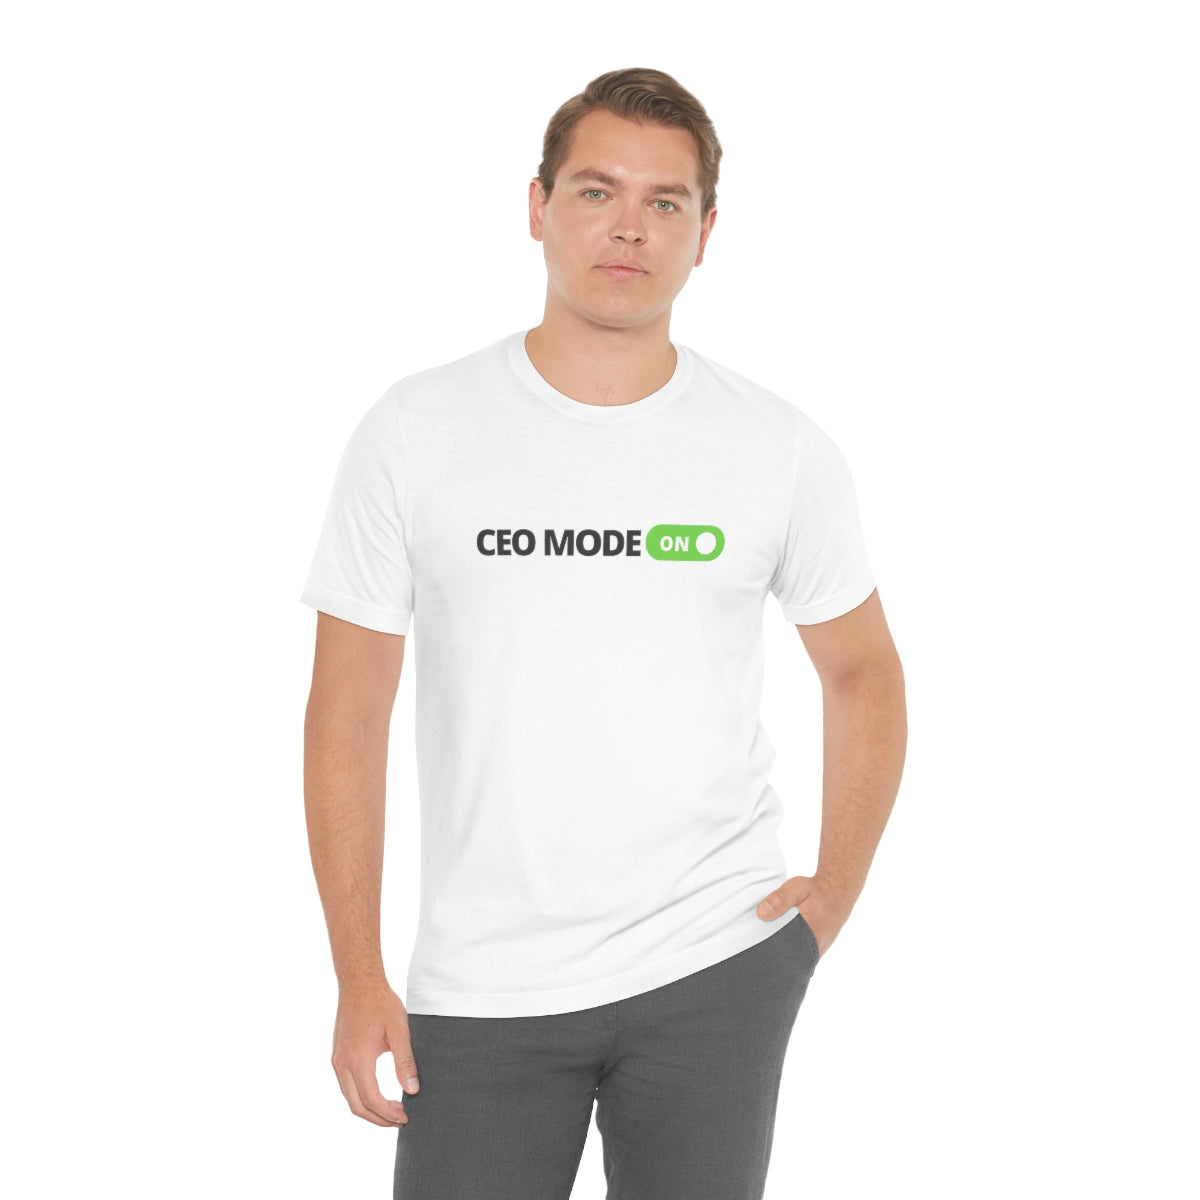 CEO Mode On T Shirt, Perfect Gift for CEOs | CEO Shirt | Entrepreneur | Business Owner | Motivation | Unisex Jersey Short Sleeve